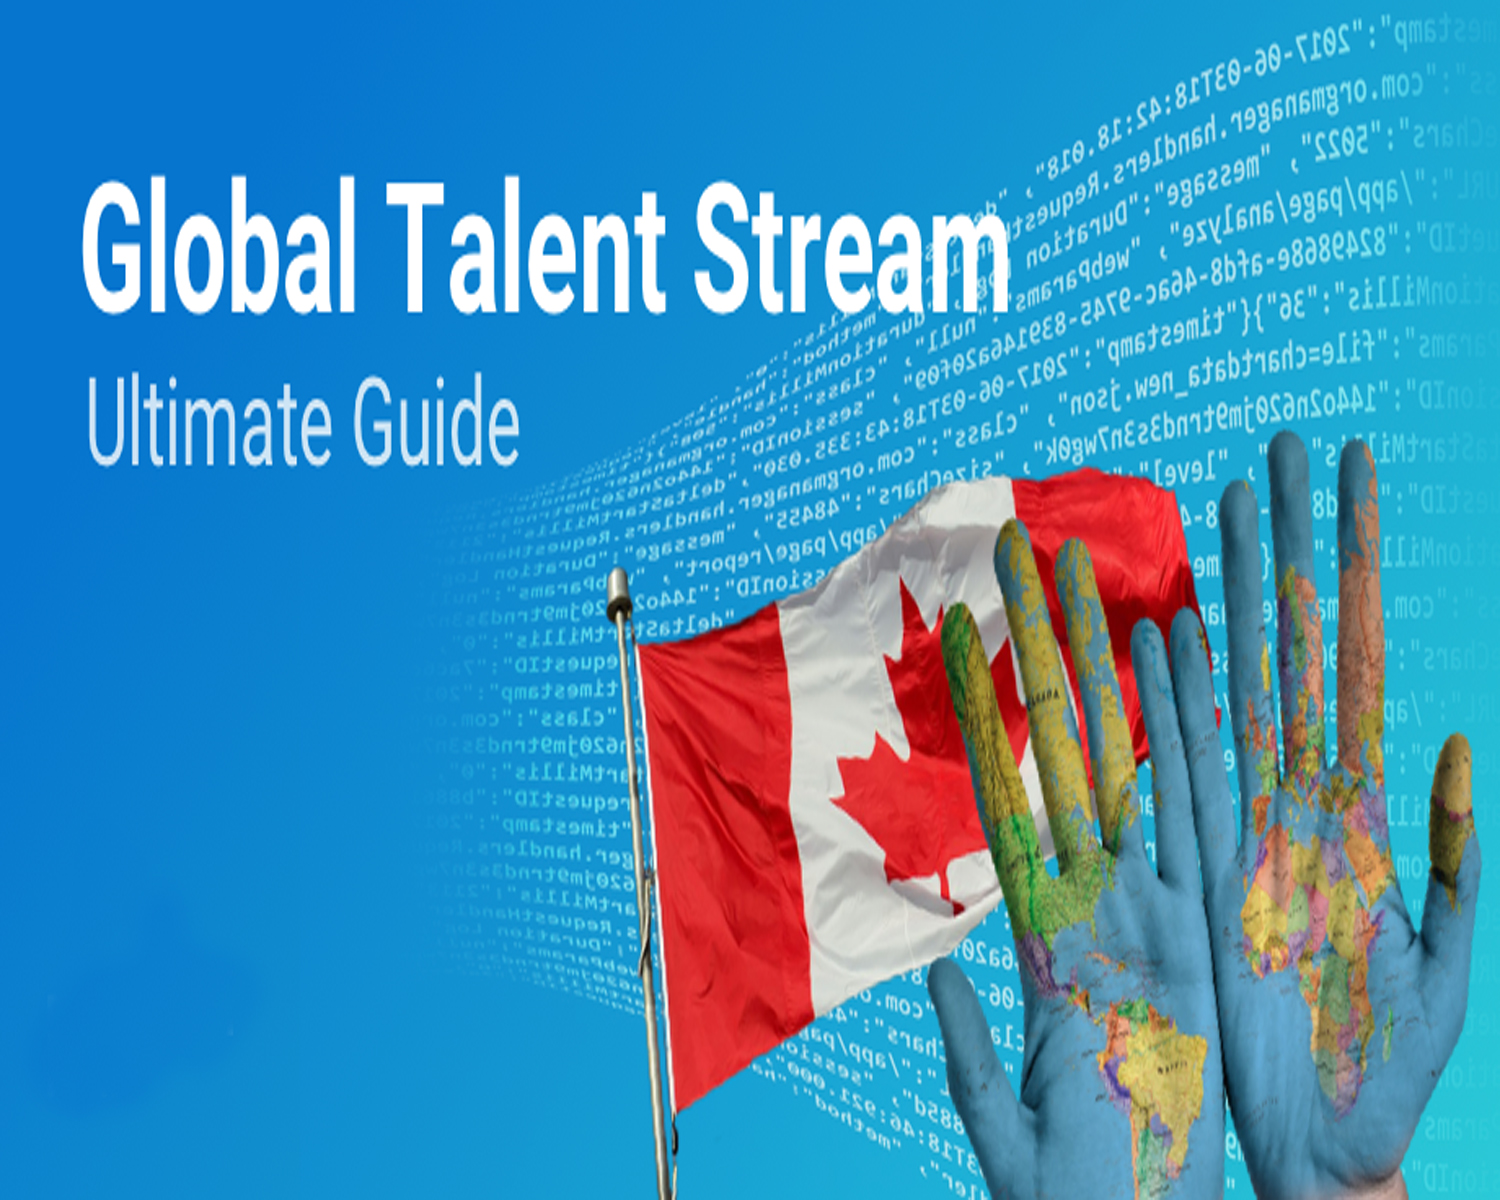 Requirements for Applying to Global Talent Stream